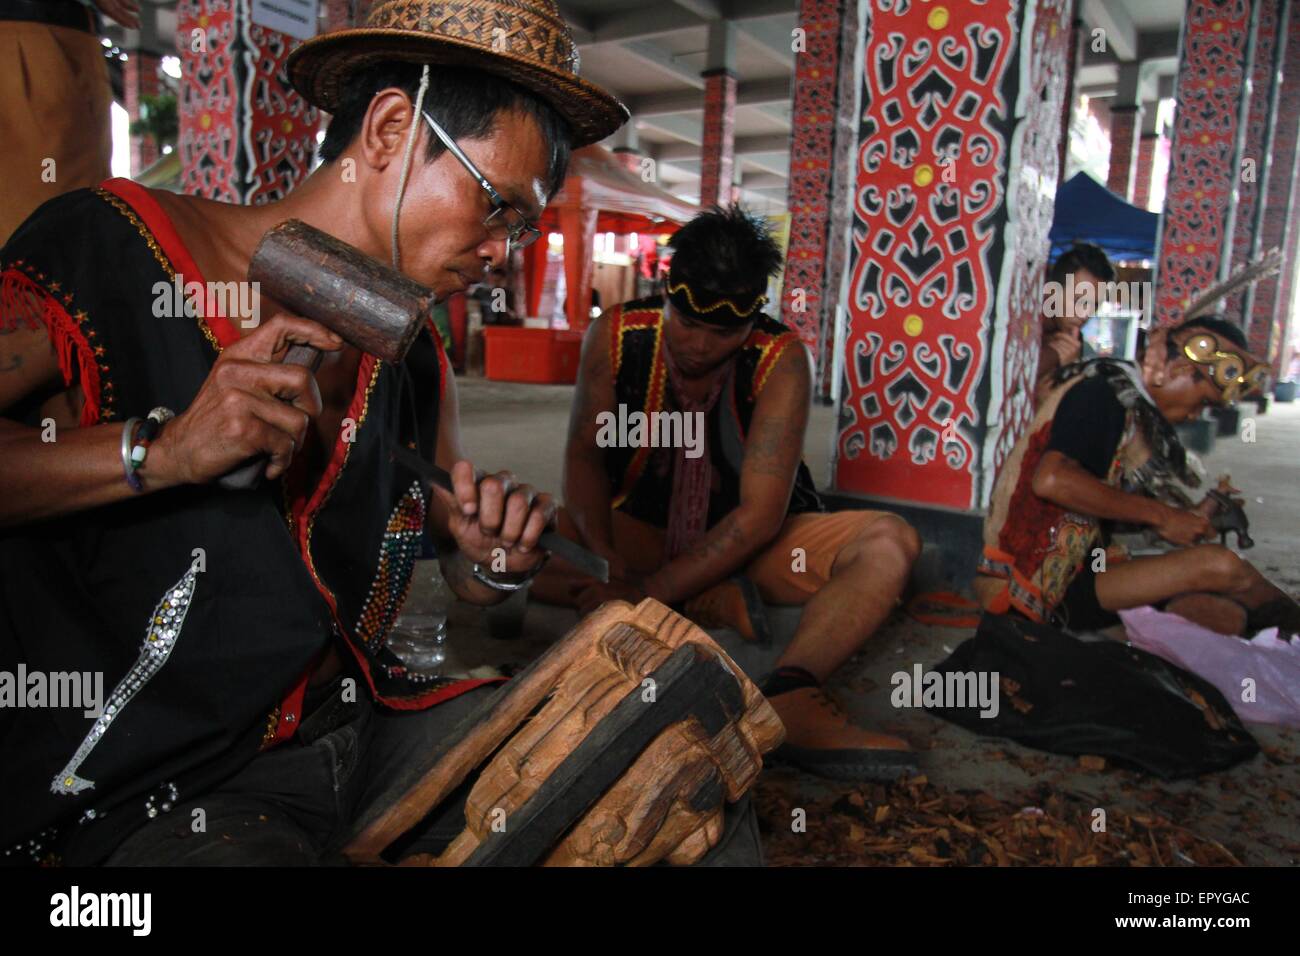 Pontianak, Indonesia. 22nd May, 2015. The craftsman of Dayak competing to curve and paint shield, using the real wood material Borneo's best quality called Belian wood, during the 'Gawai Dayak 2015'. © Yohanes Kurnia Irawan/PacificPress/Alamy Live News Stock Photo